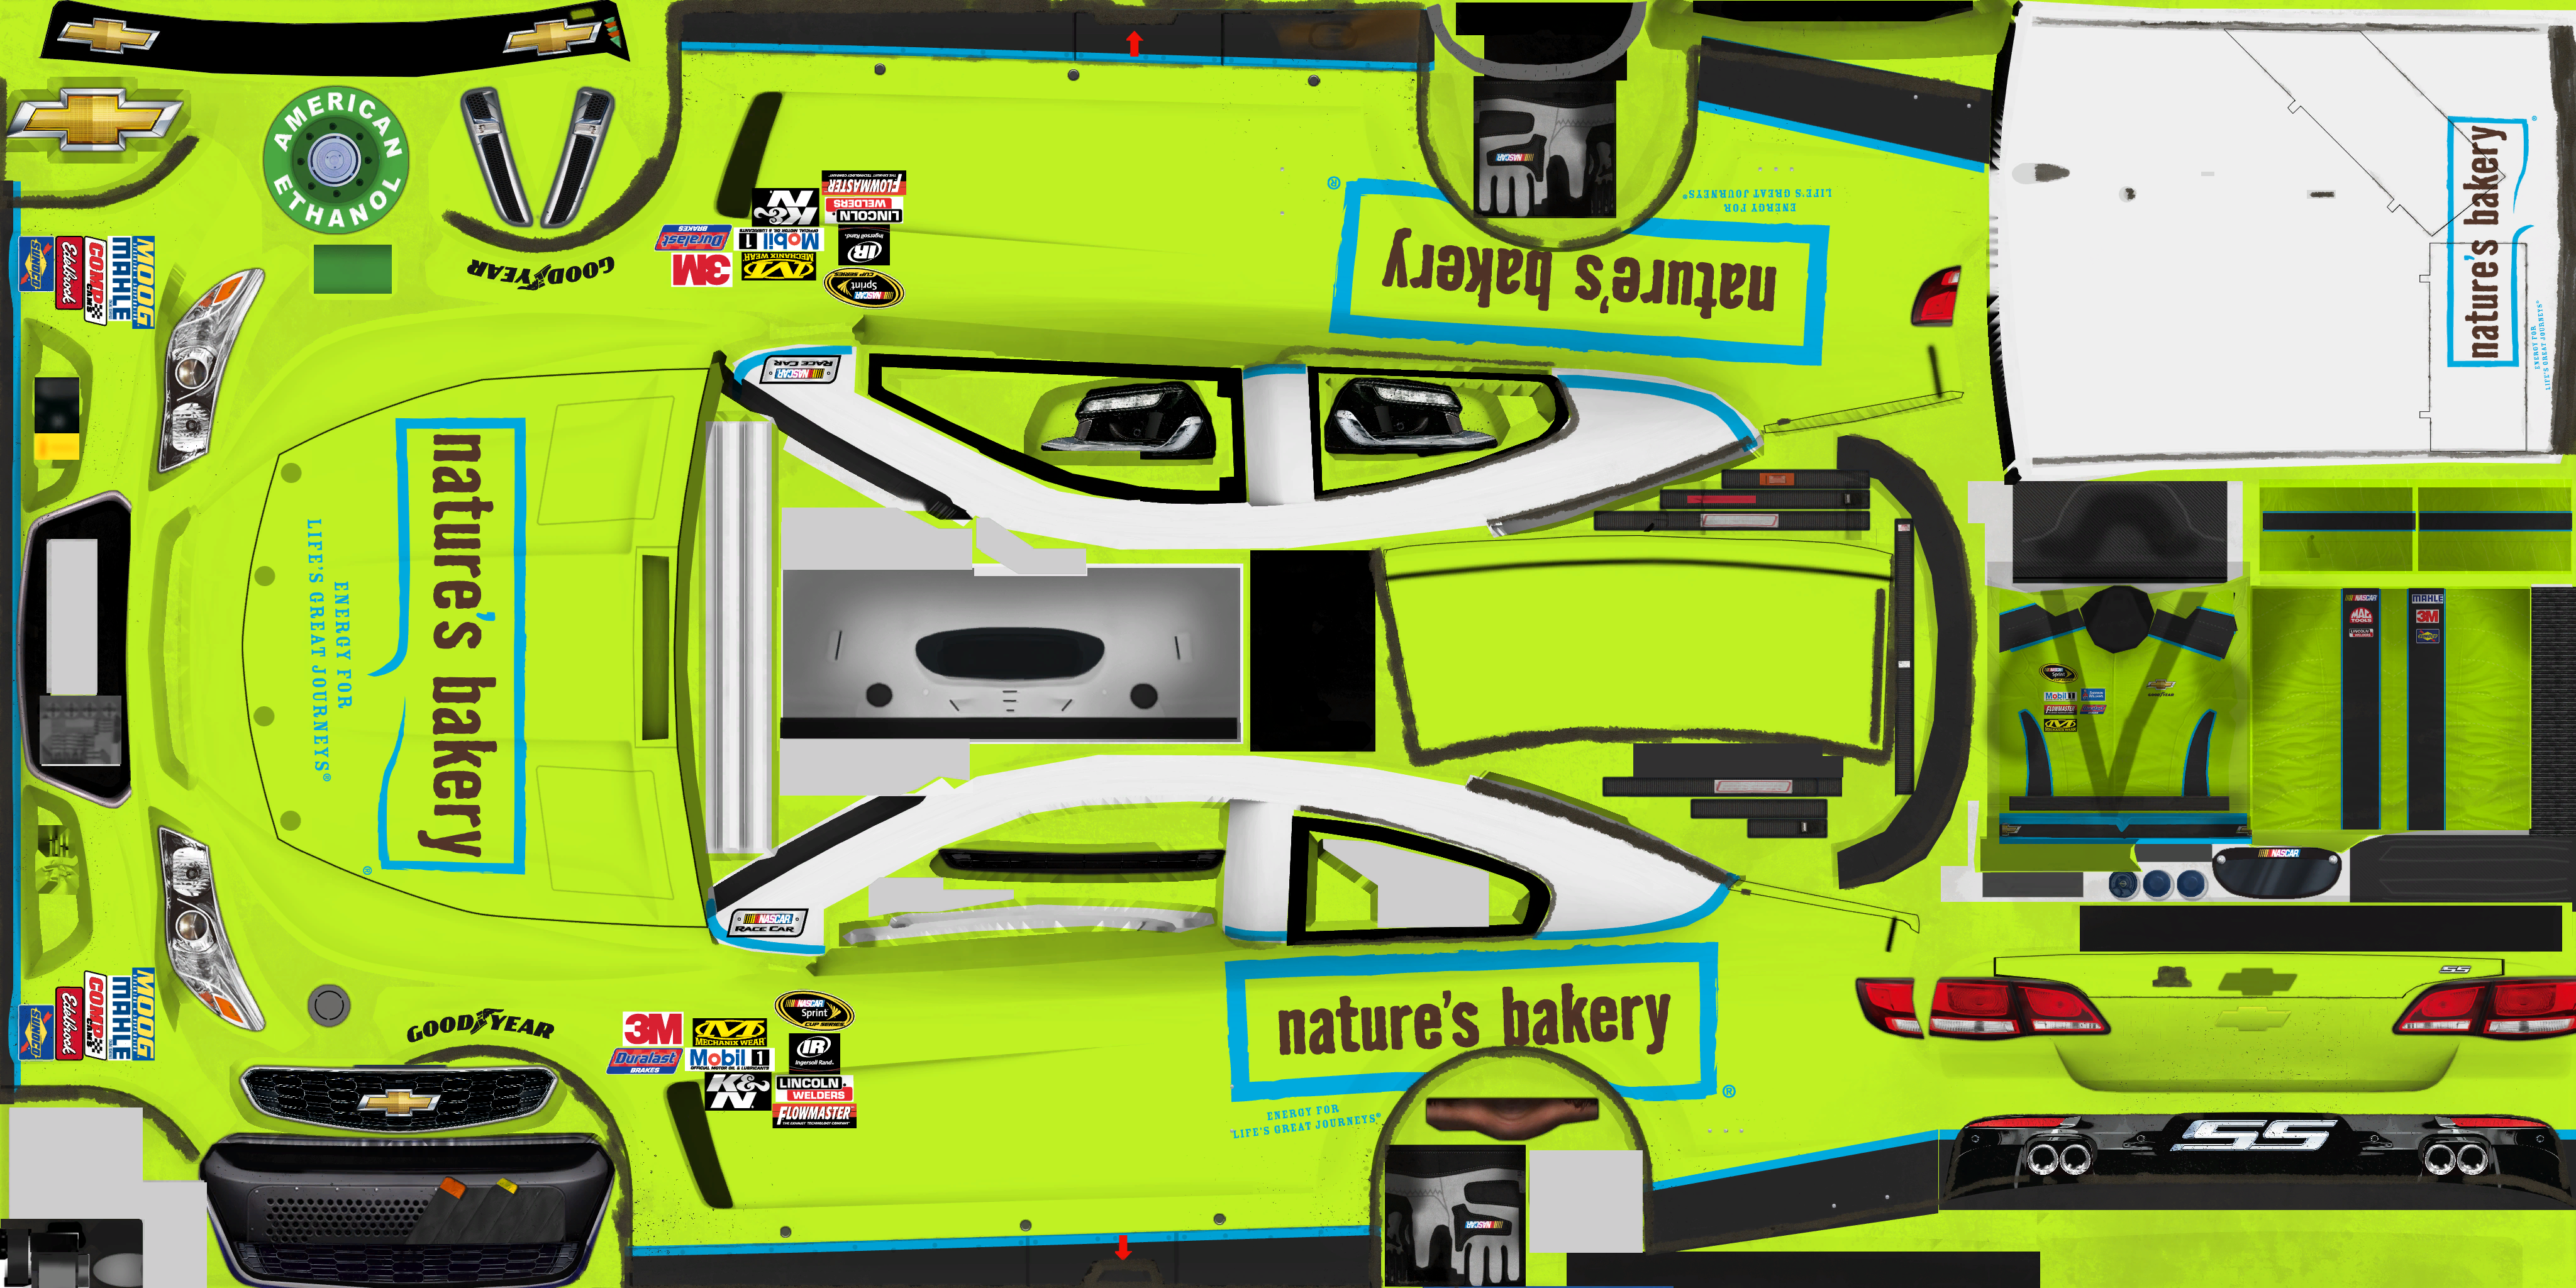 Contract 3: Nature's Bakery Chevrolet